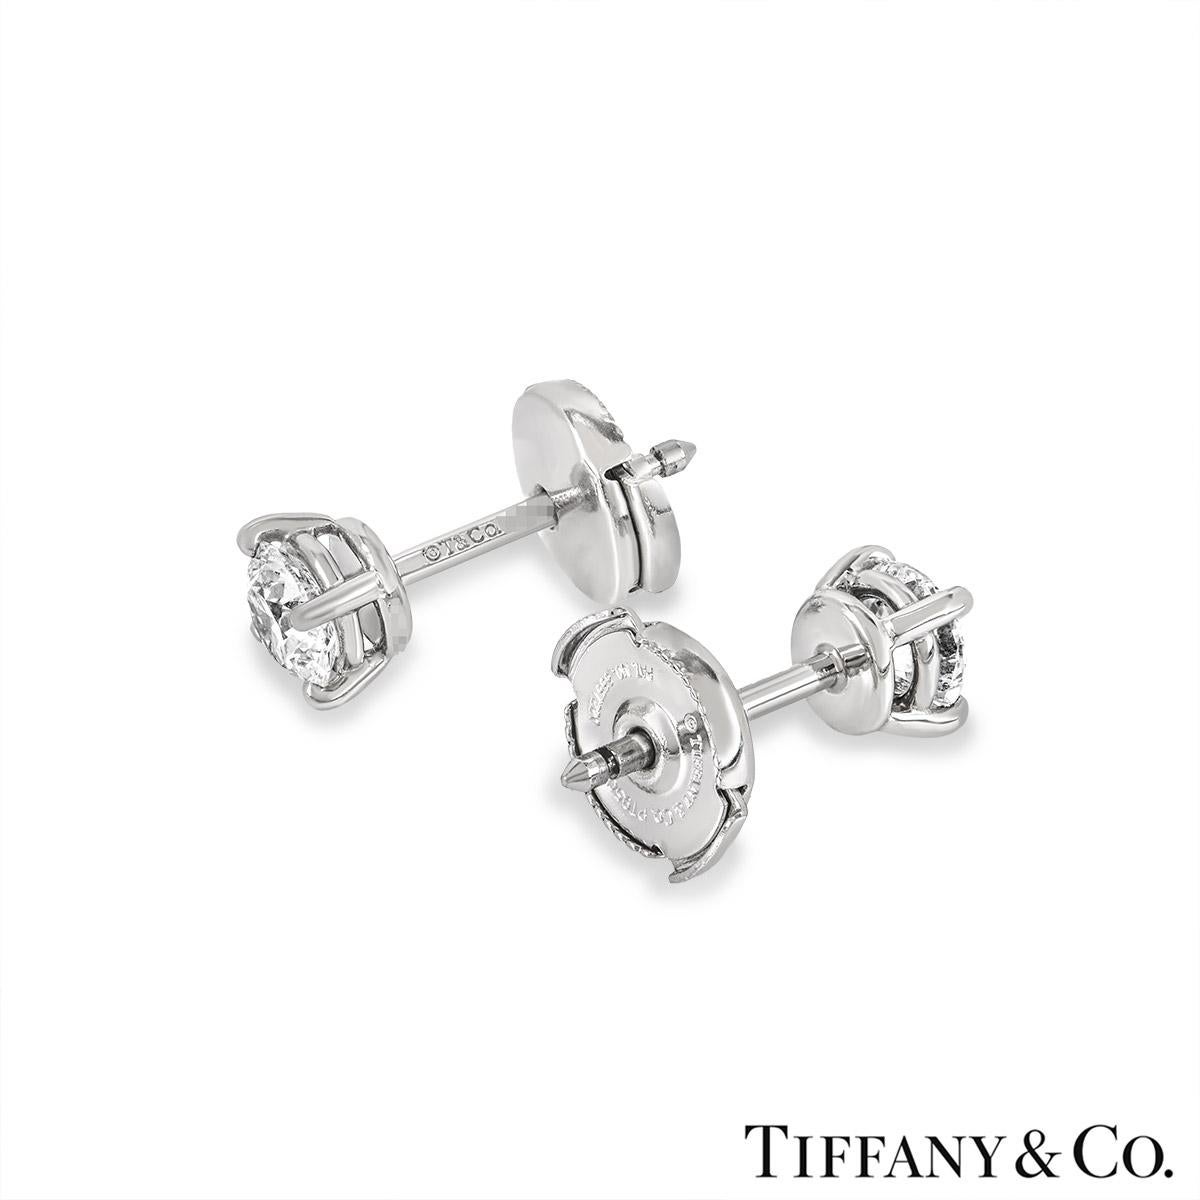 A gorgeous pair of platinum diamond ear studs by Tiffany & Co. Each earring is set with a round brilliant cut diamond in a four-claw setting. Both diamonds have a weight of 0.41ct and are H colour, one diamond is VS1 clarity and the other is VS2